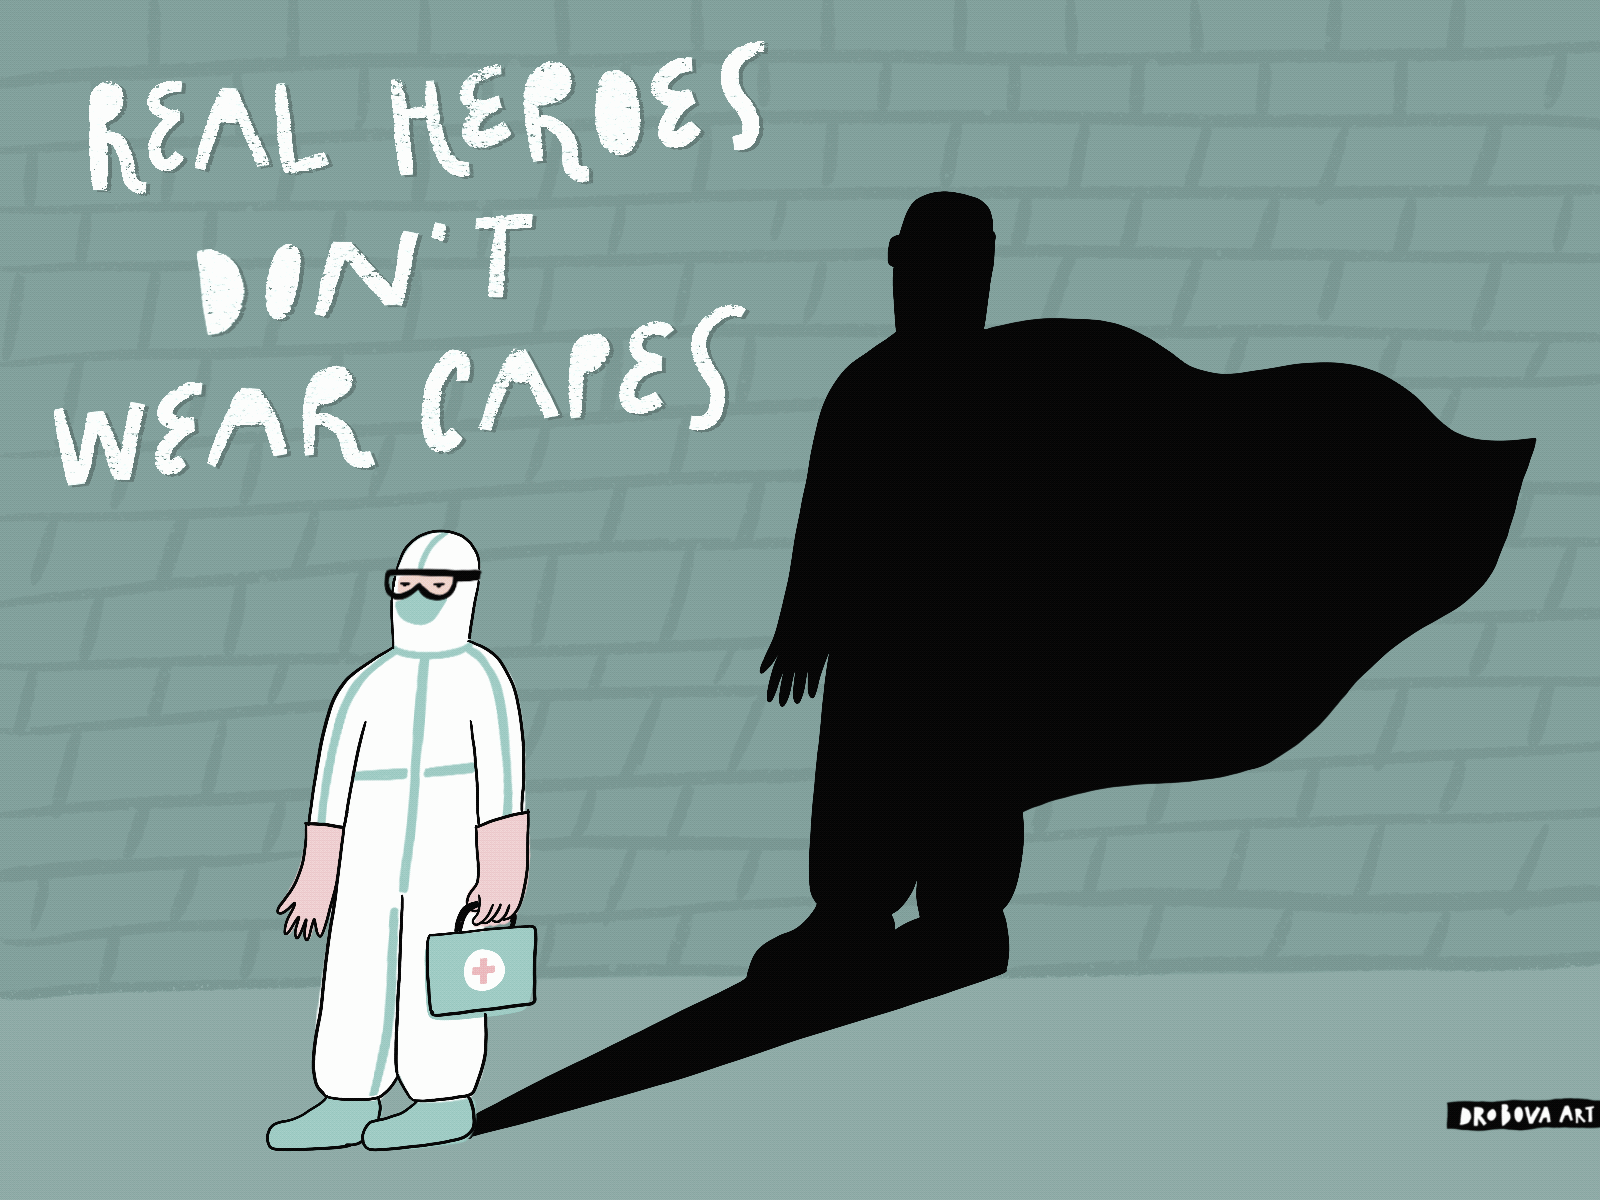 Real heroes don't wear capes animated animation coronavirus doctor gif hand drawn illustration lettering motivation poster